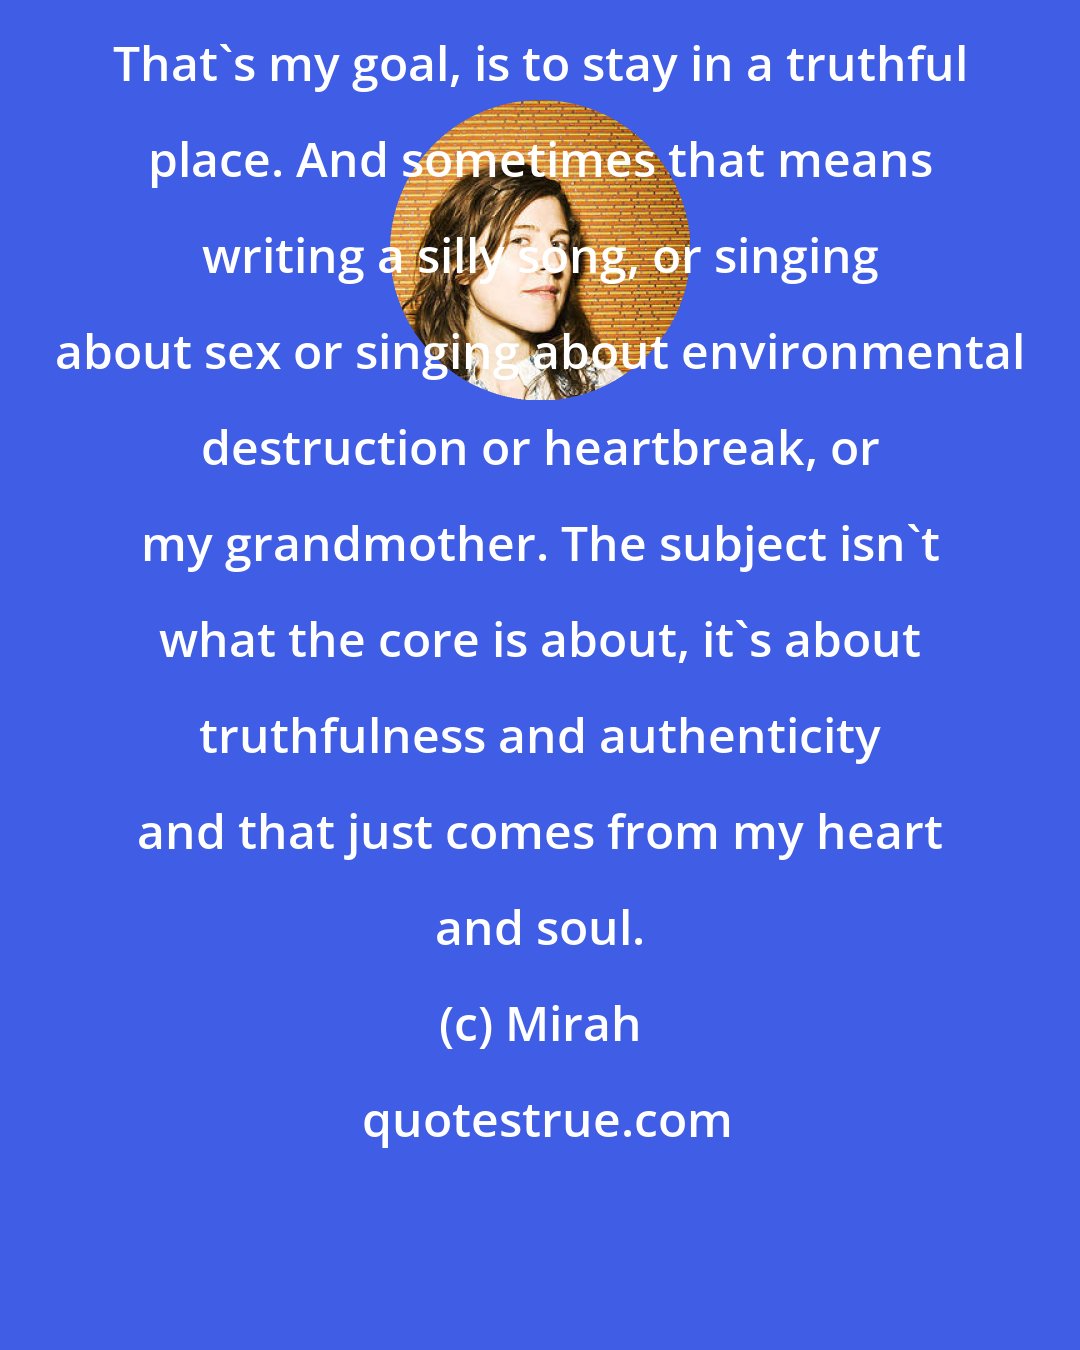 Mirah: That's my goal, is to stay in a truthful place. And sometimes that means writing a silly song, or singing about sex or singing about environmental destruction or heartbreak, or my grandmother. The subject isn't what the core is about, it's about truthfulness and authenticity and that just comes from my heart and soul.